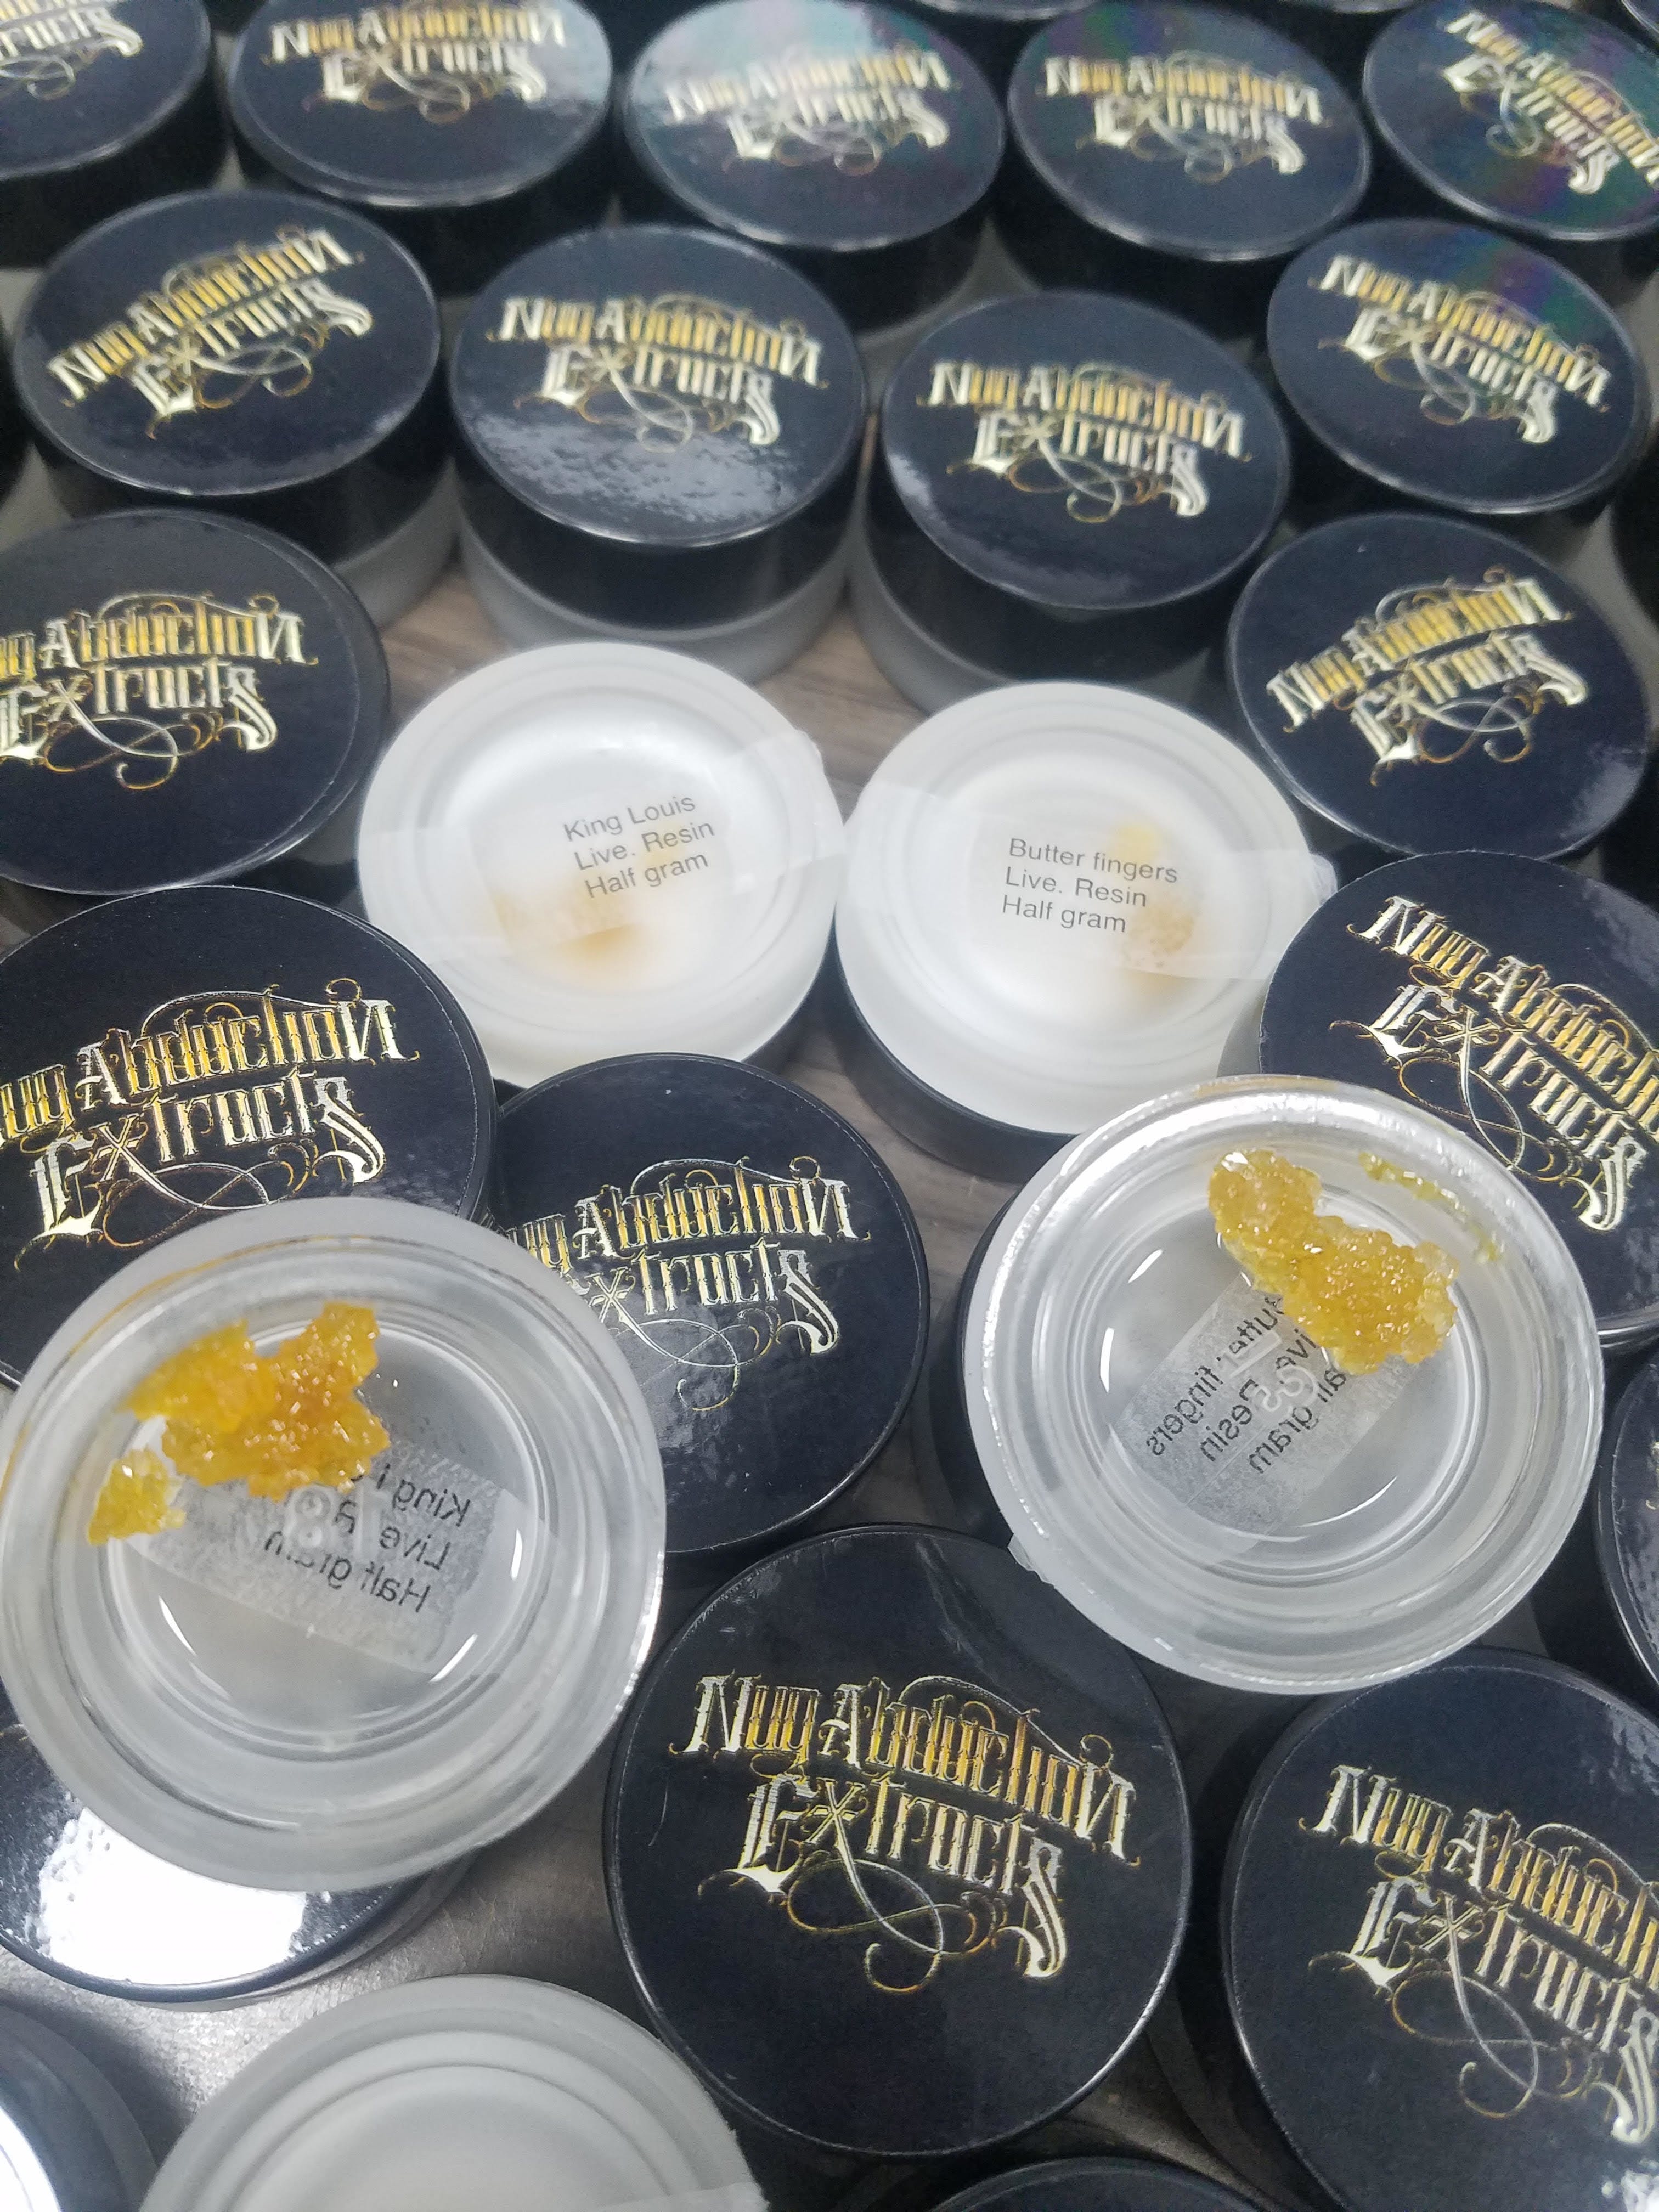 NUG ABDUCTION EXTRACTS - LIVE RESIN